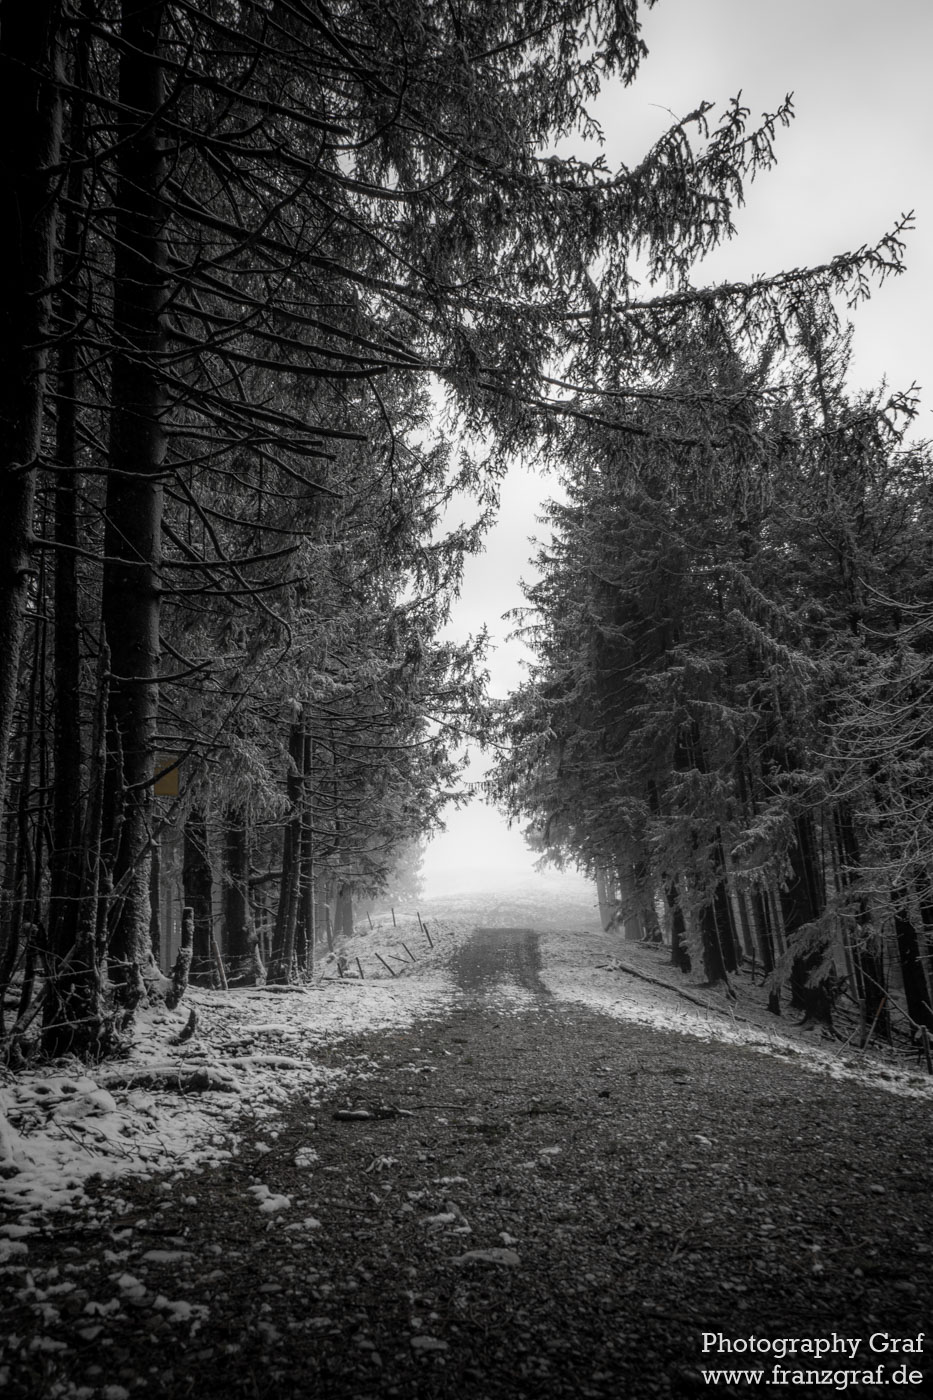 This is a stunning black and white photograph that captures the essence of the wilderness in winter. Dominated by the colors black and grey, the image features a dirt road leading through a heavily forested area. The trees, including conifers and maples, are covered in a delicate layer of snow, conveying a sense of tranquility and serenity. The sky overhead is vast and seemingly infinite, adding a sense of depth to the landscape. The image is void of any human presence, suggesting a sense of isolation and solitude. The ground is also covered in snow, reflecting the chill of the winter season. The sight of fog rolling in through the trees further enhances the atmospheric quality of the image. This photograph truly encapsulates the raw, untouched beauty of nature. The image was taken by Franz Graf, as indicated by the watermark.